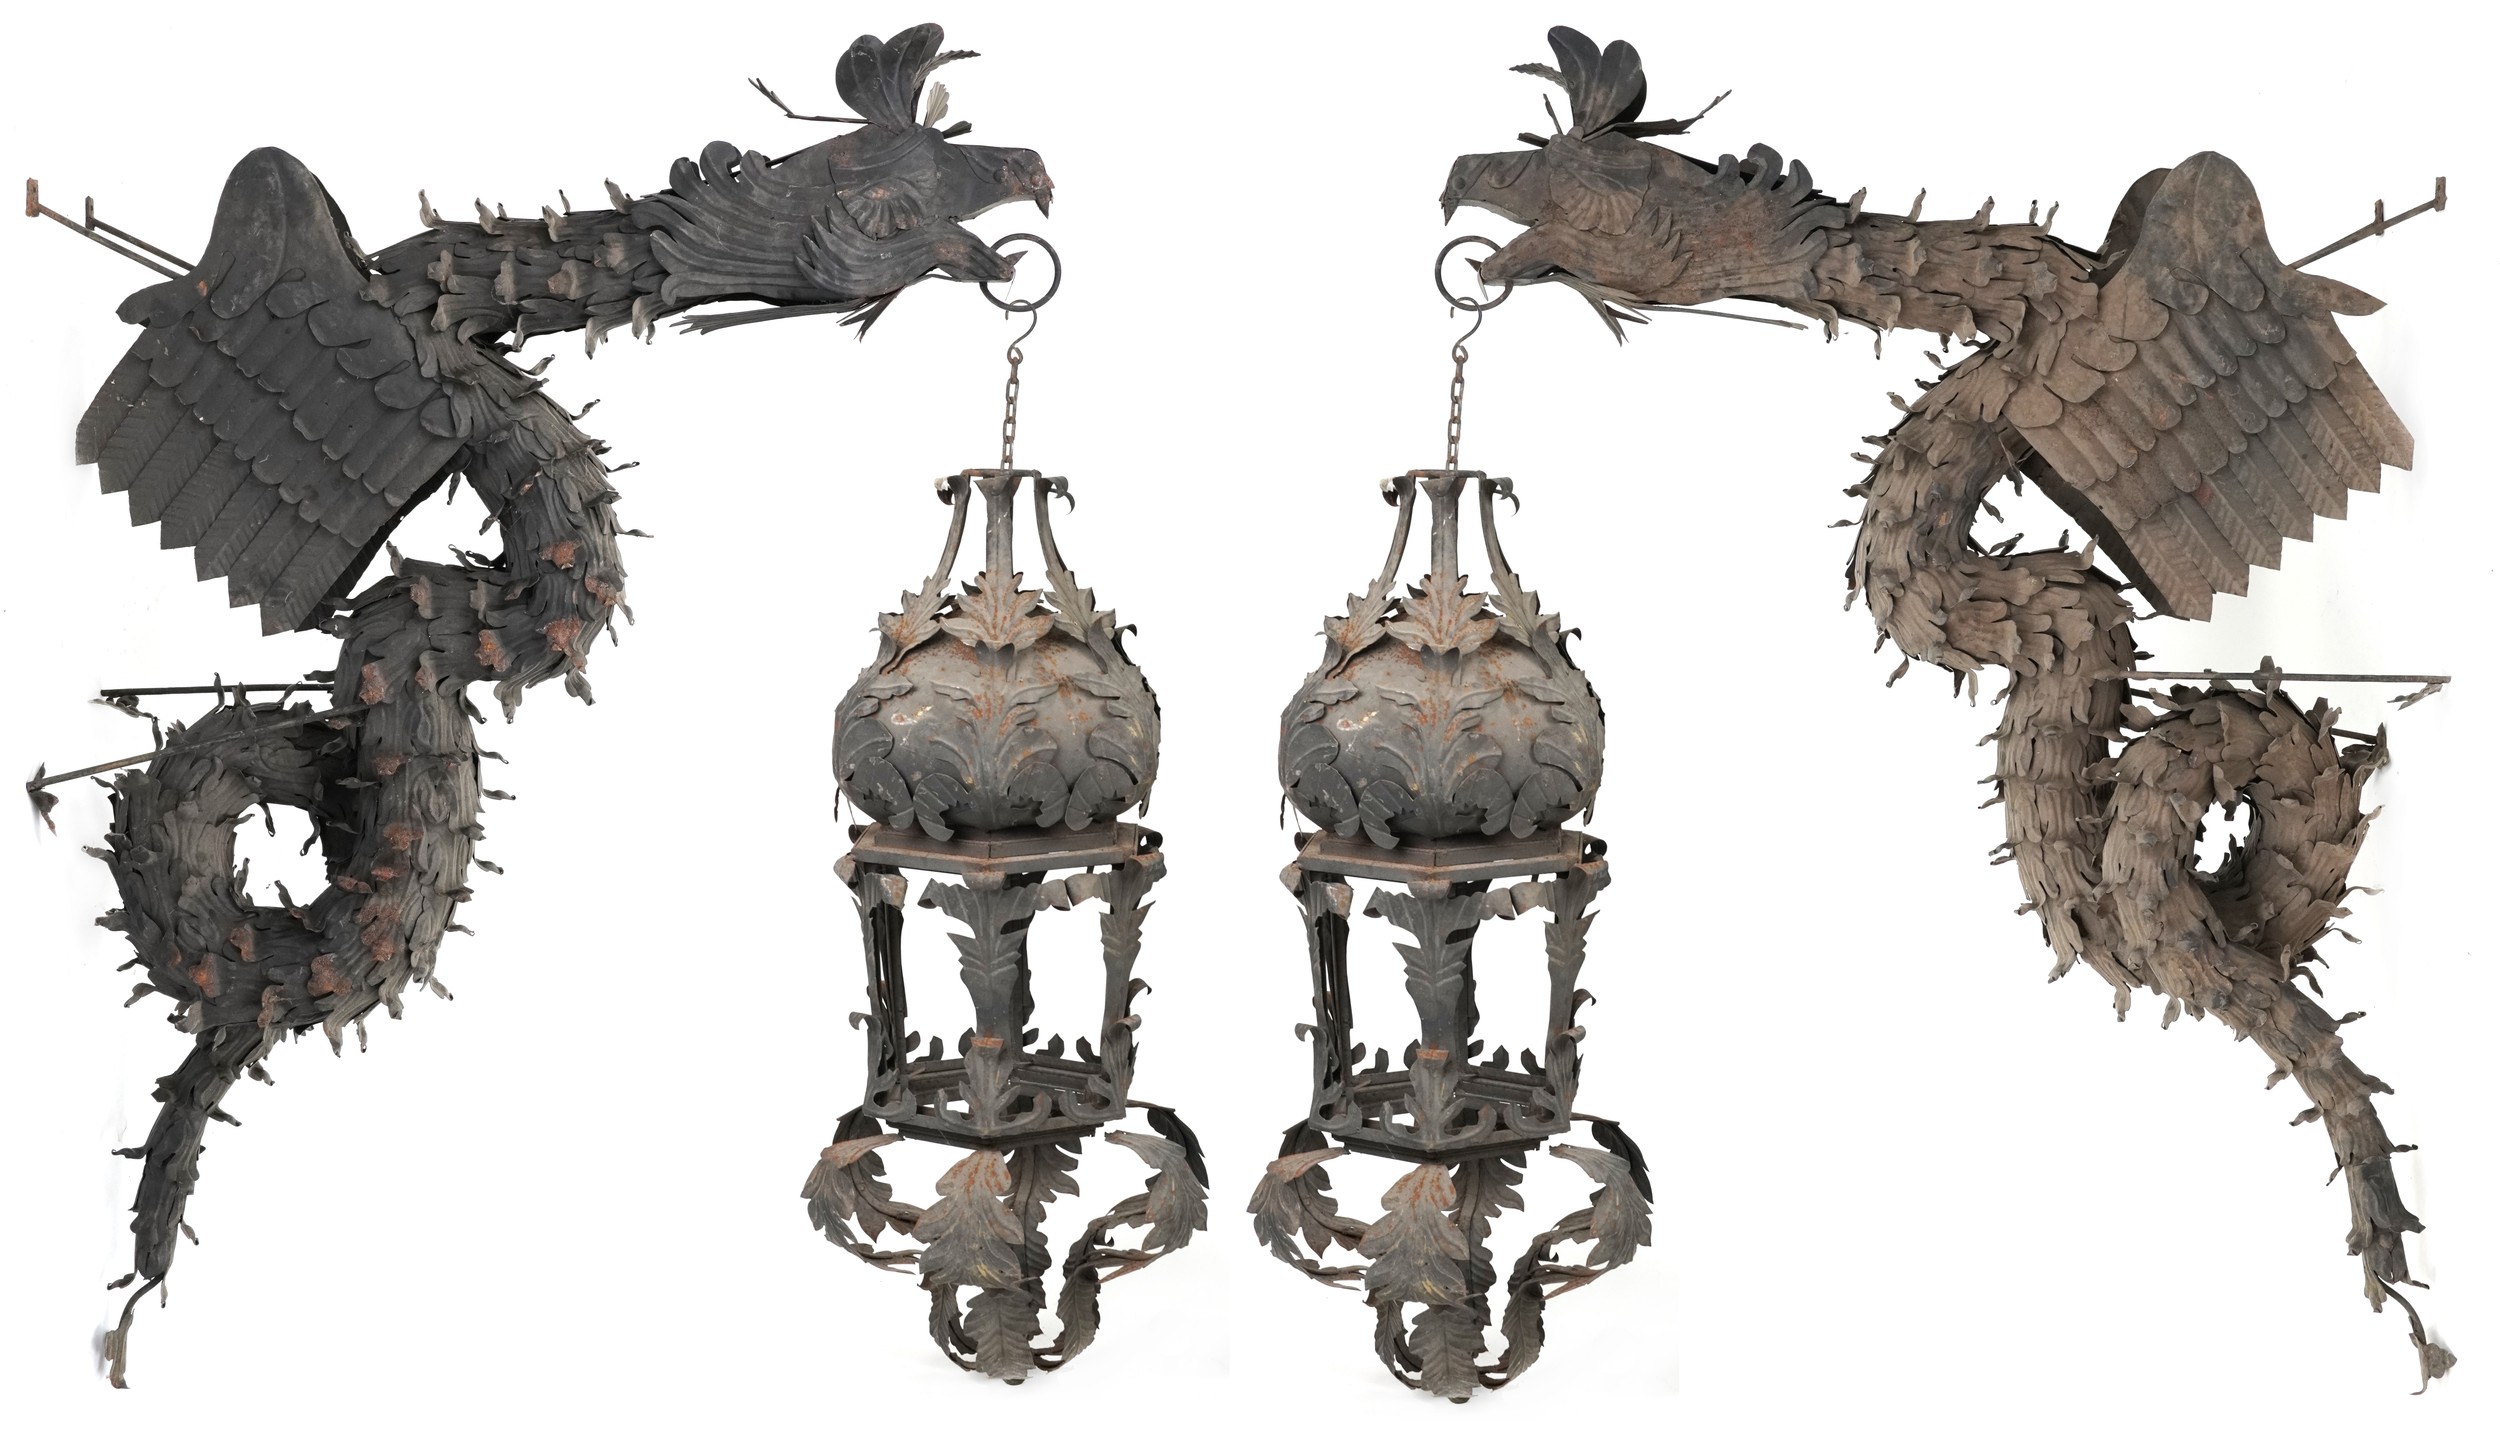 Pair of Chinese iron dragon wall lantern wall sculptures, each dragon 200cm in length - Image 2 of 2